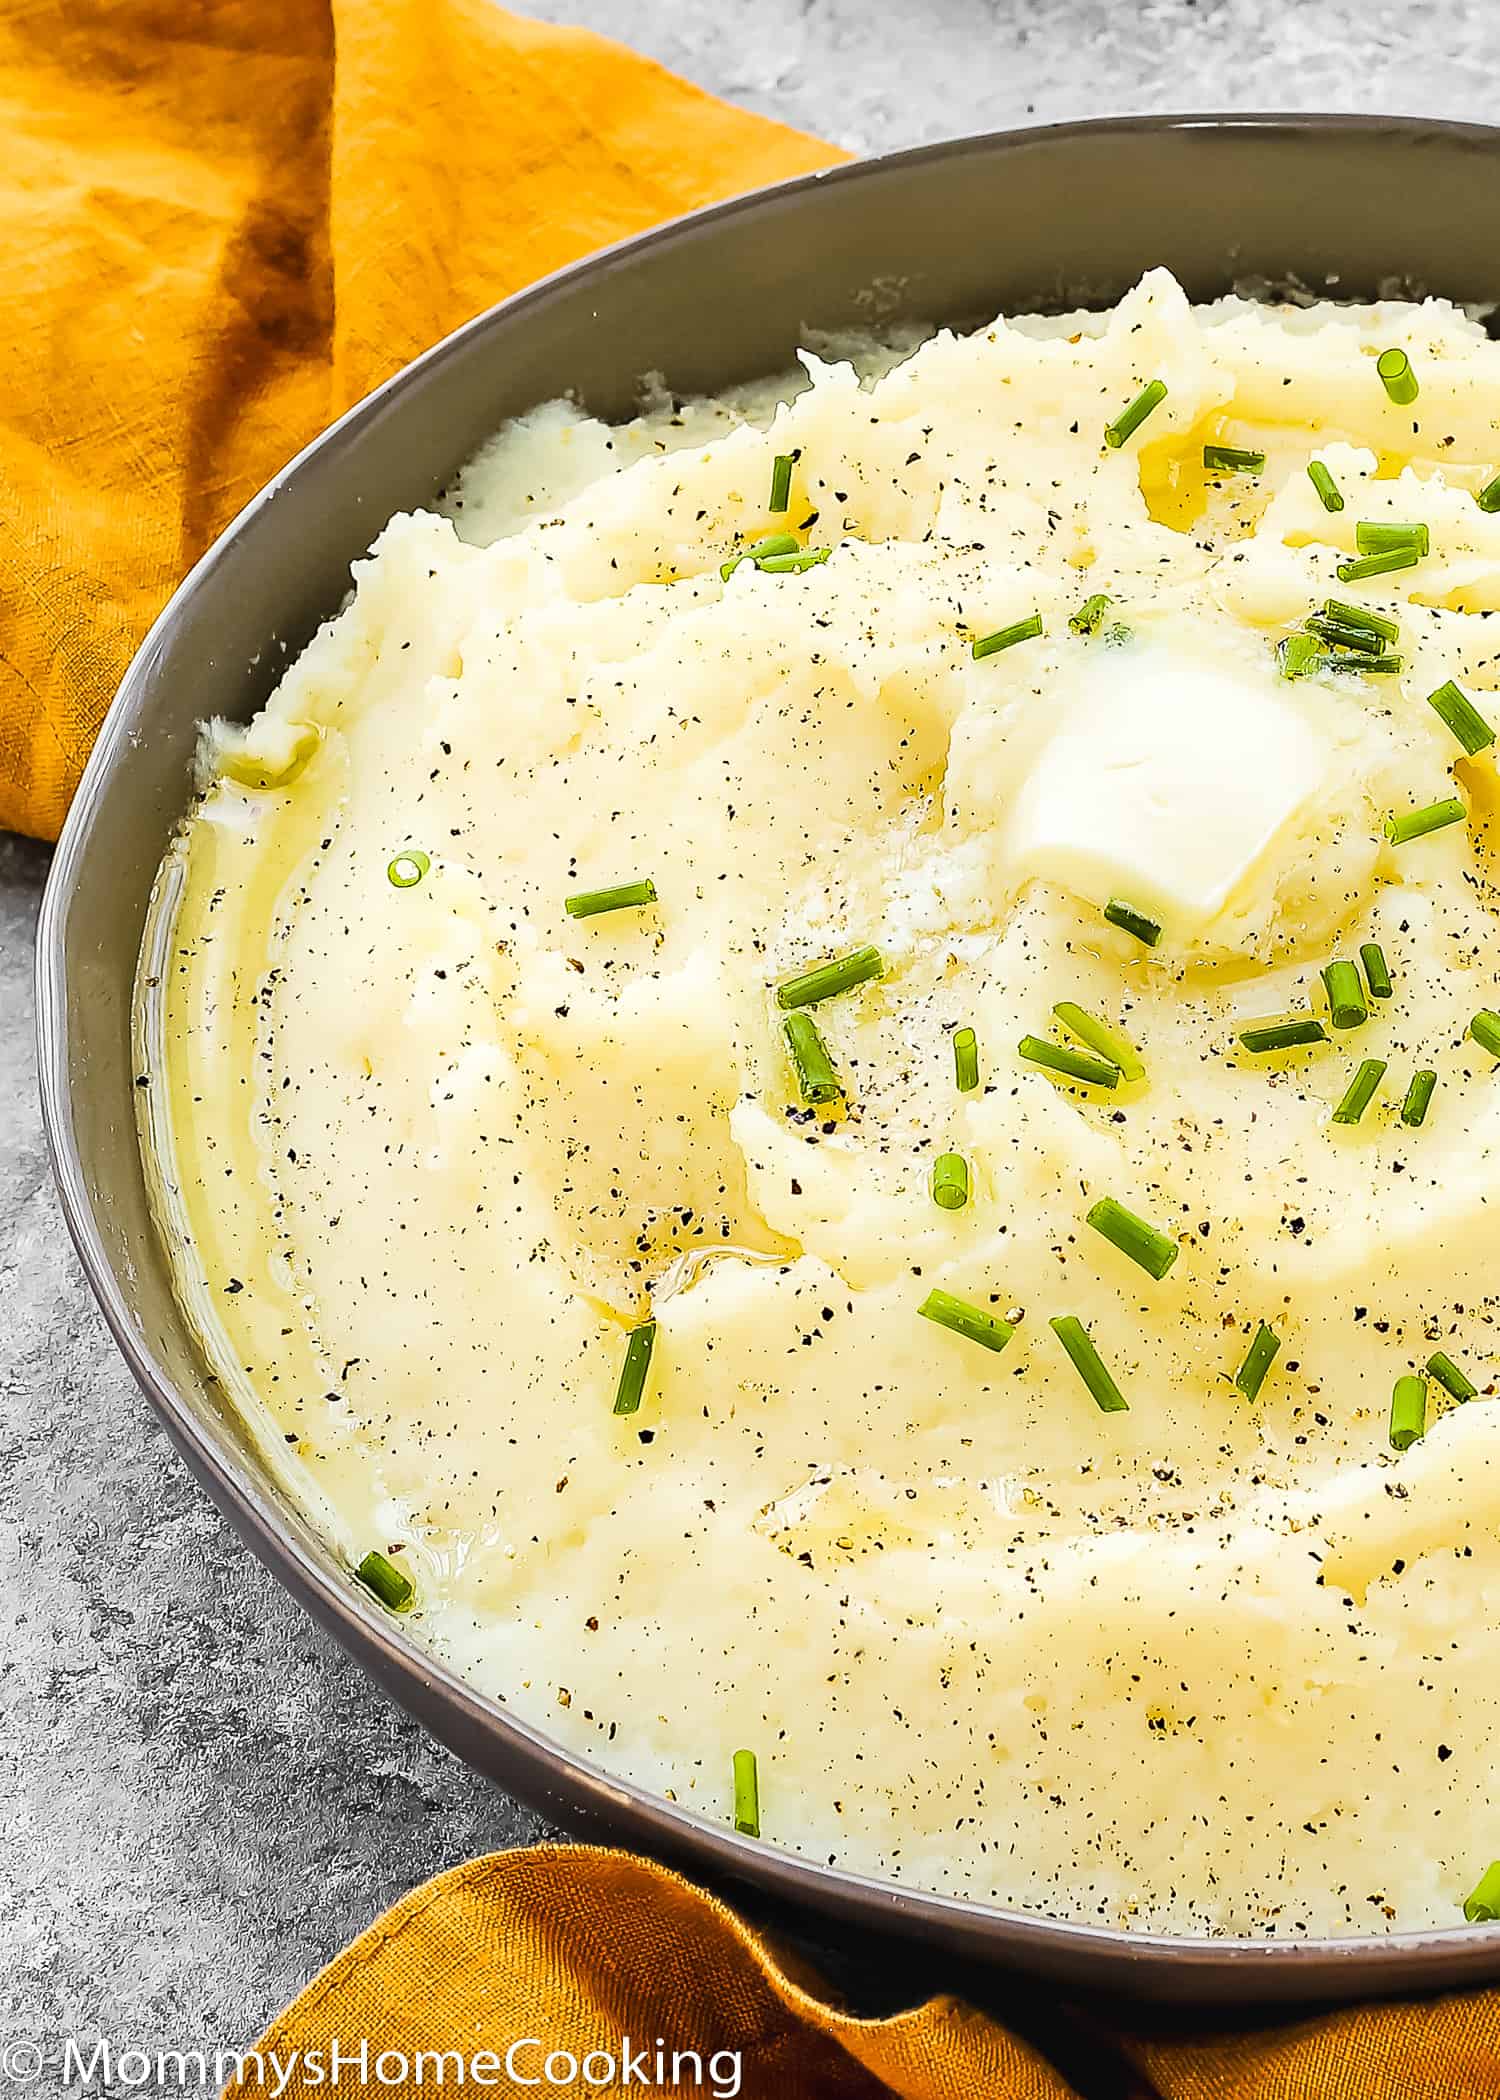 mashed potatoes in a serving bowl with butter and chives on top.